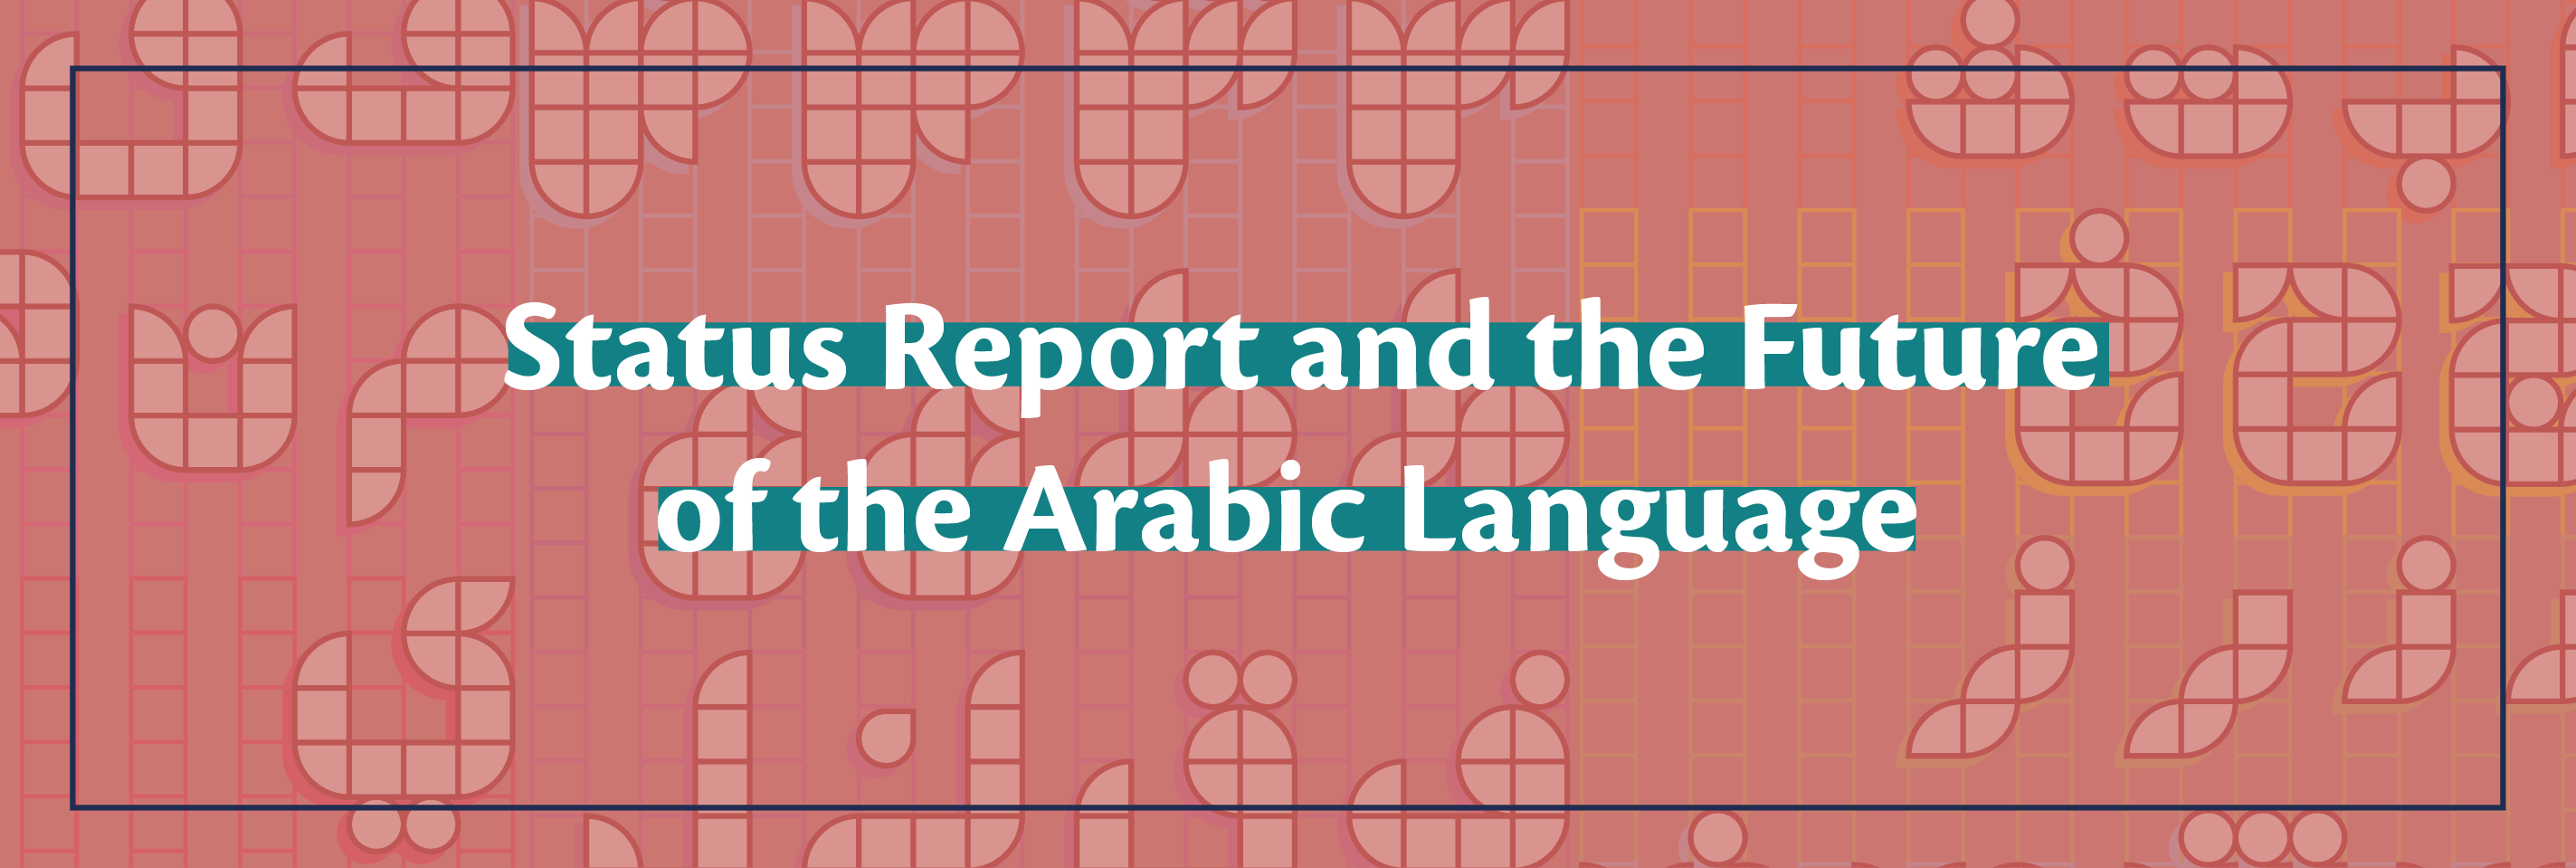 Report on the status and future of the Arabic language